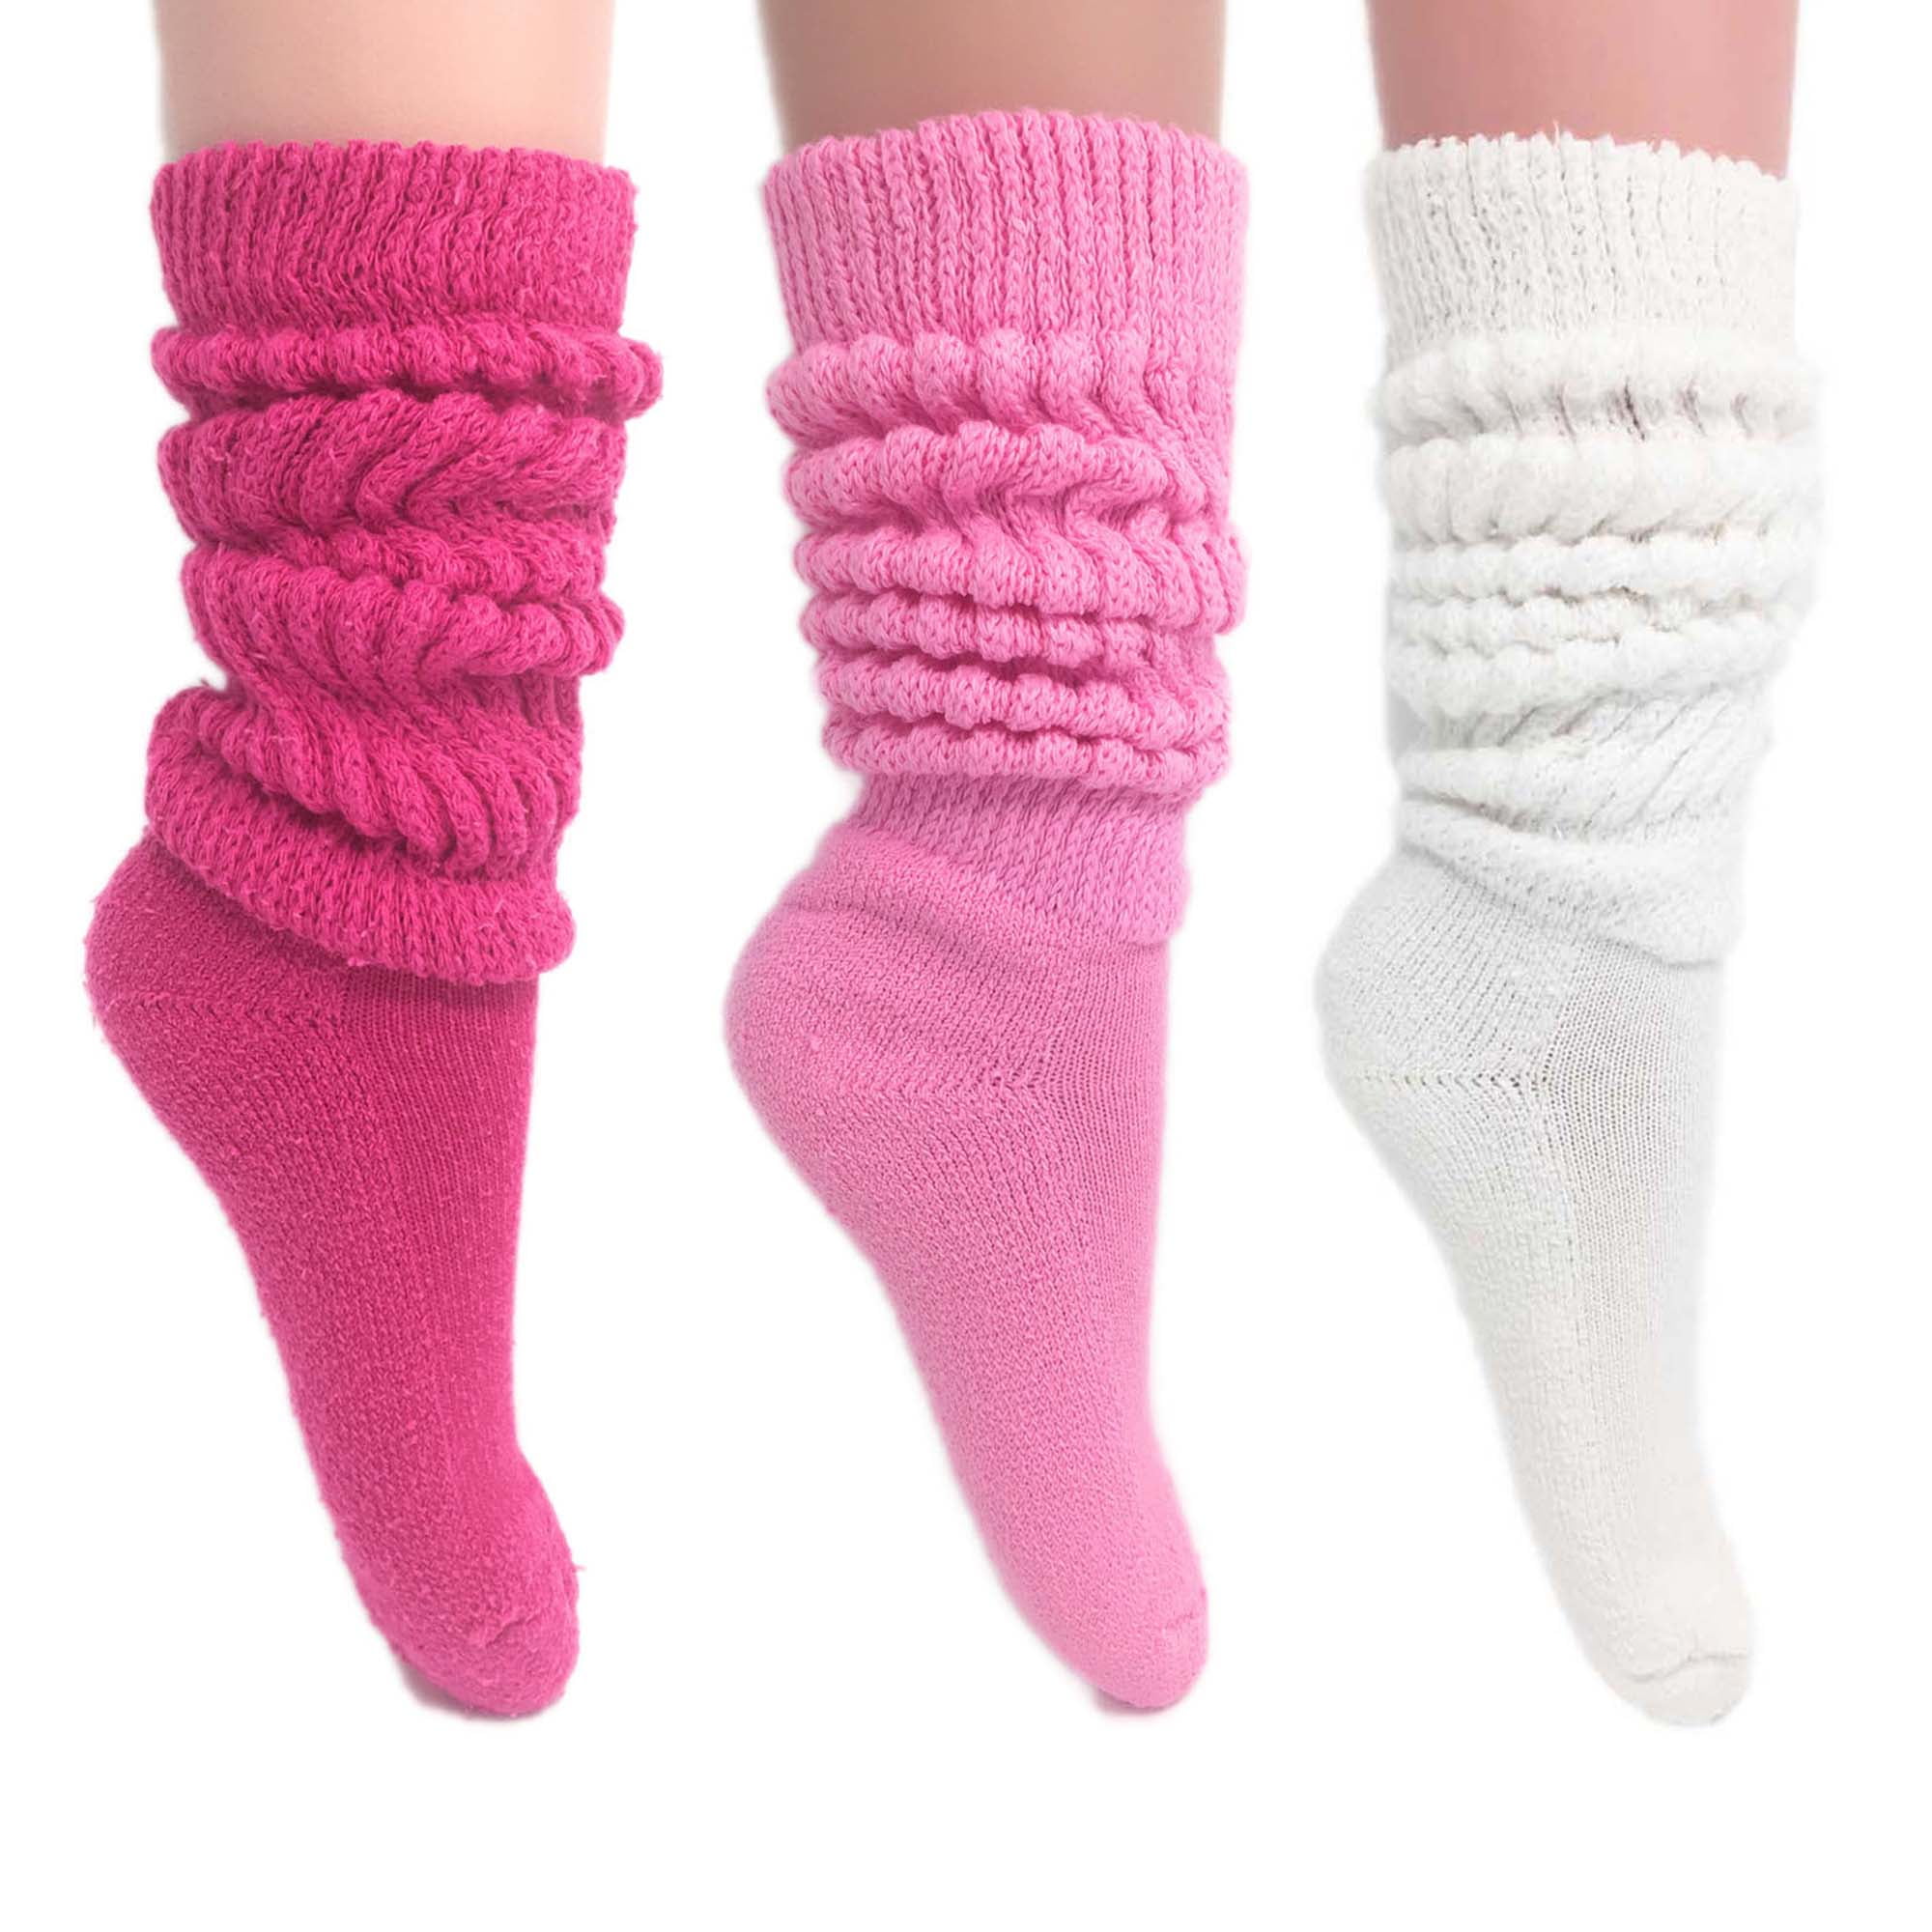 Pack of 3 Pairs Brown Pink and Light Blue Slipper Socks Size 9-11 